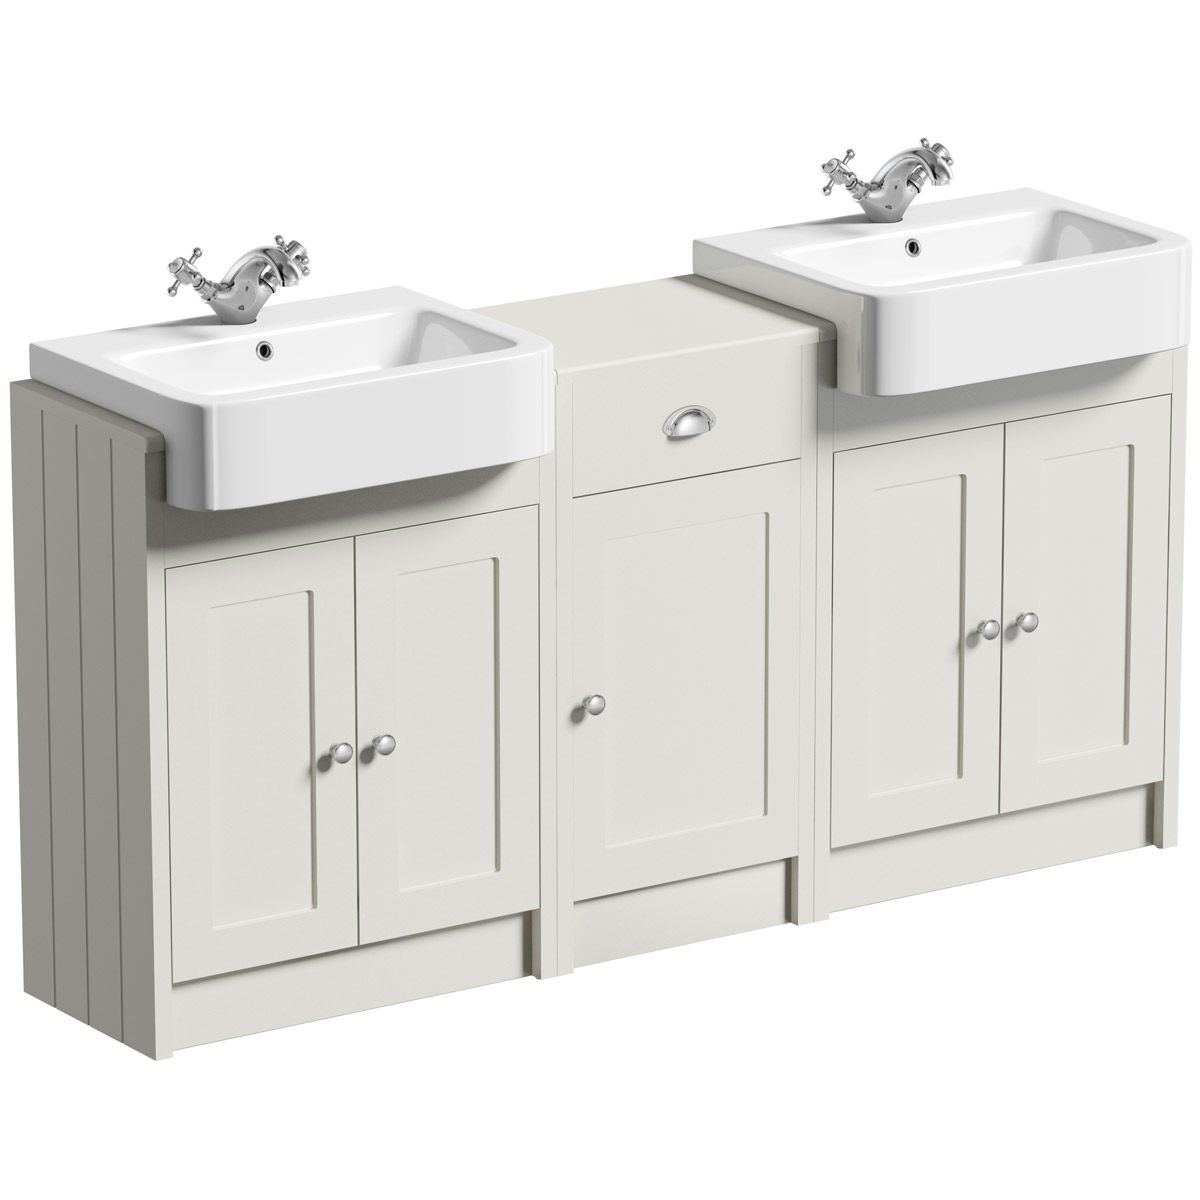 Orchard Dulwich stone ivory floorstanding double vanity unit and basin with storage combination